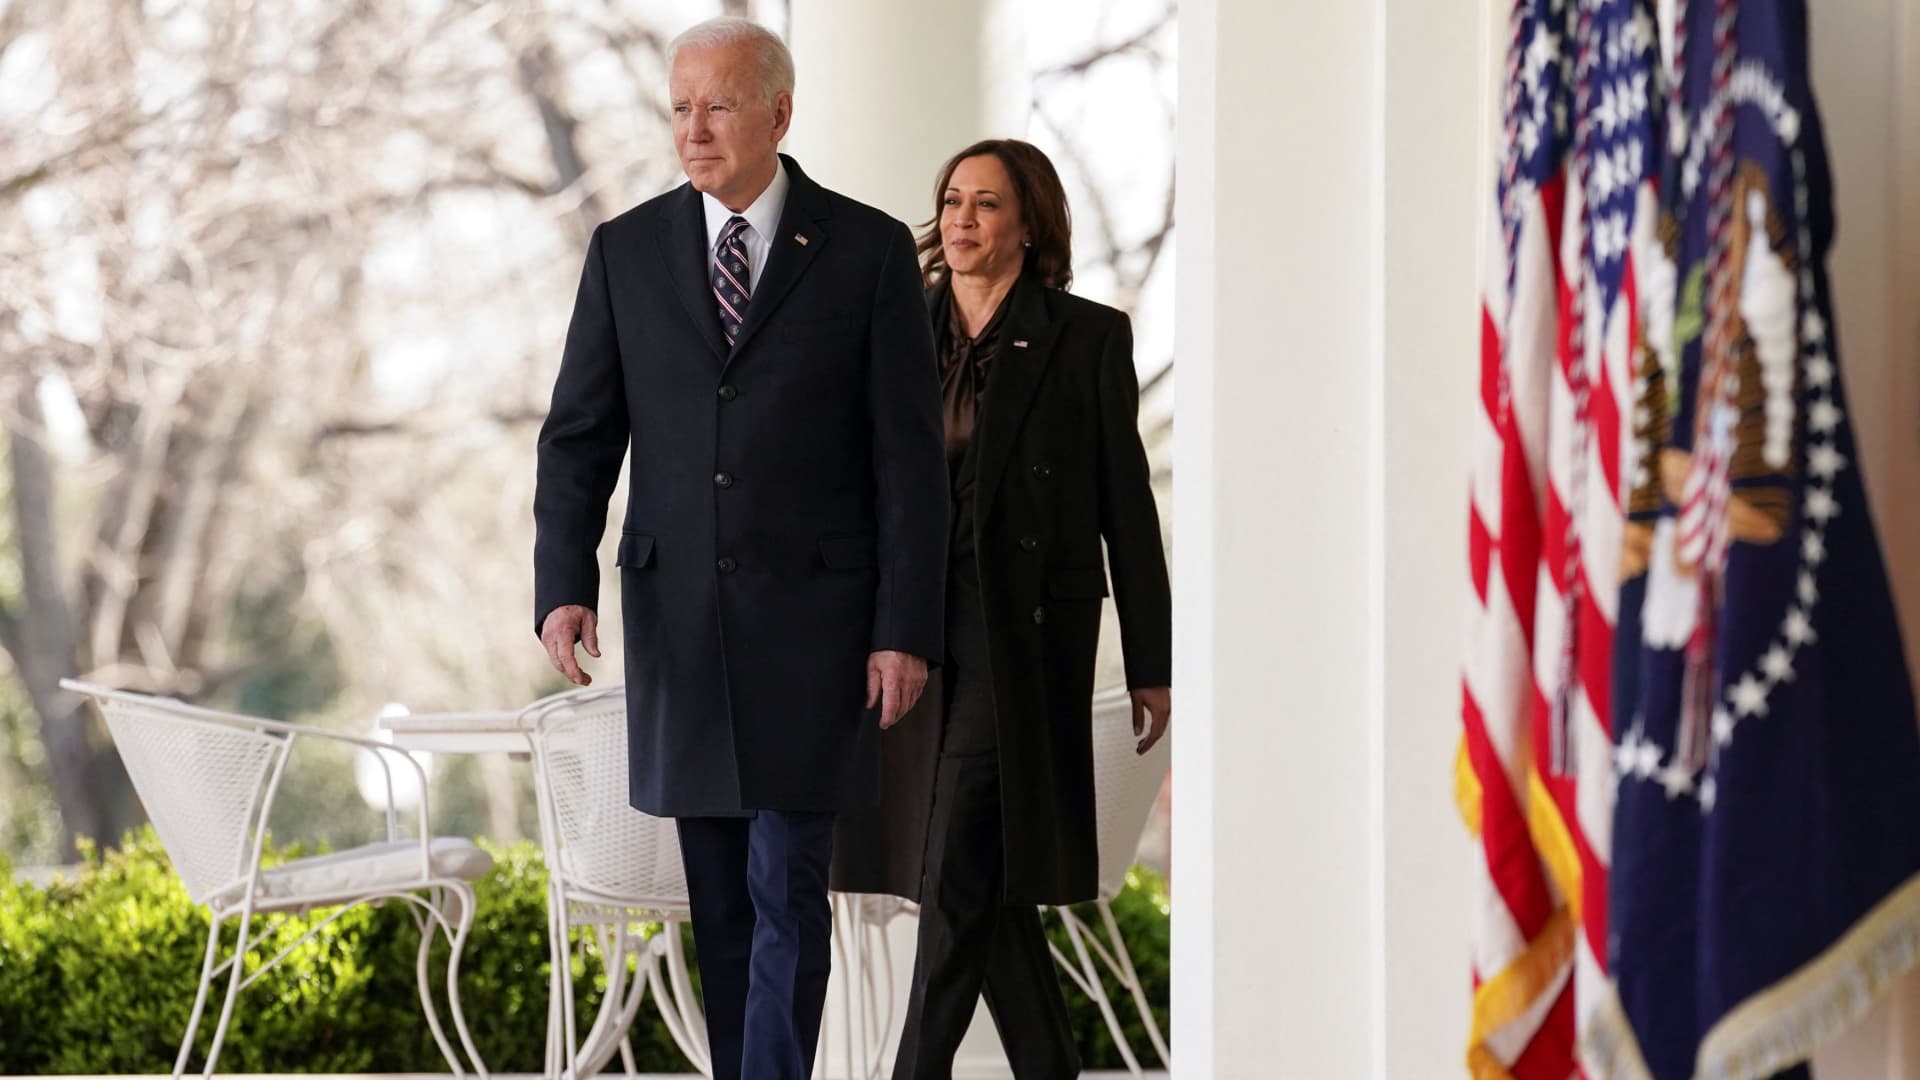 Harris, Newsom engage with donors as possible 2024 bids loom if Biden doesn’t run